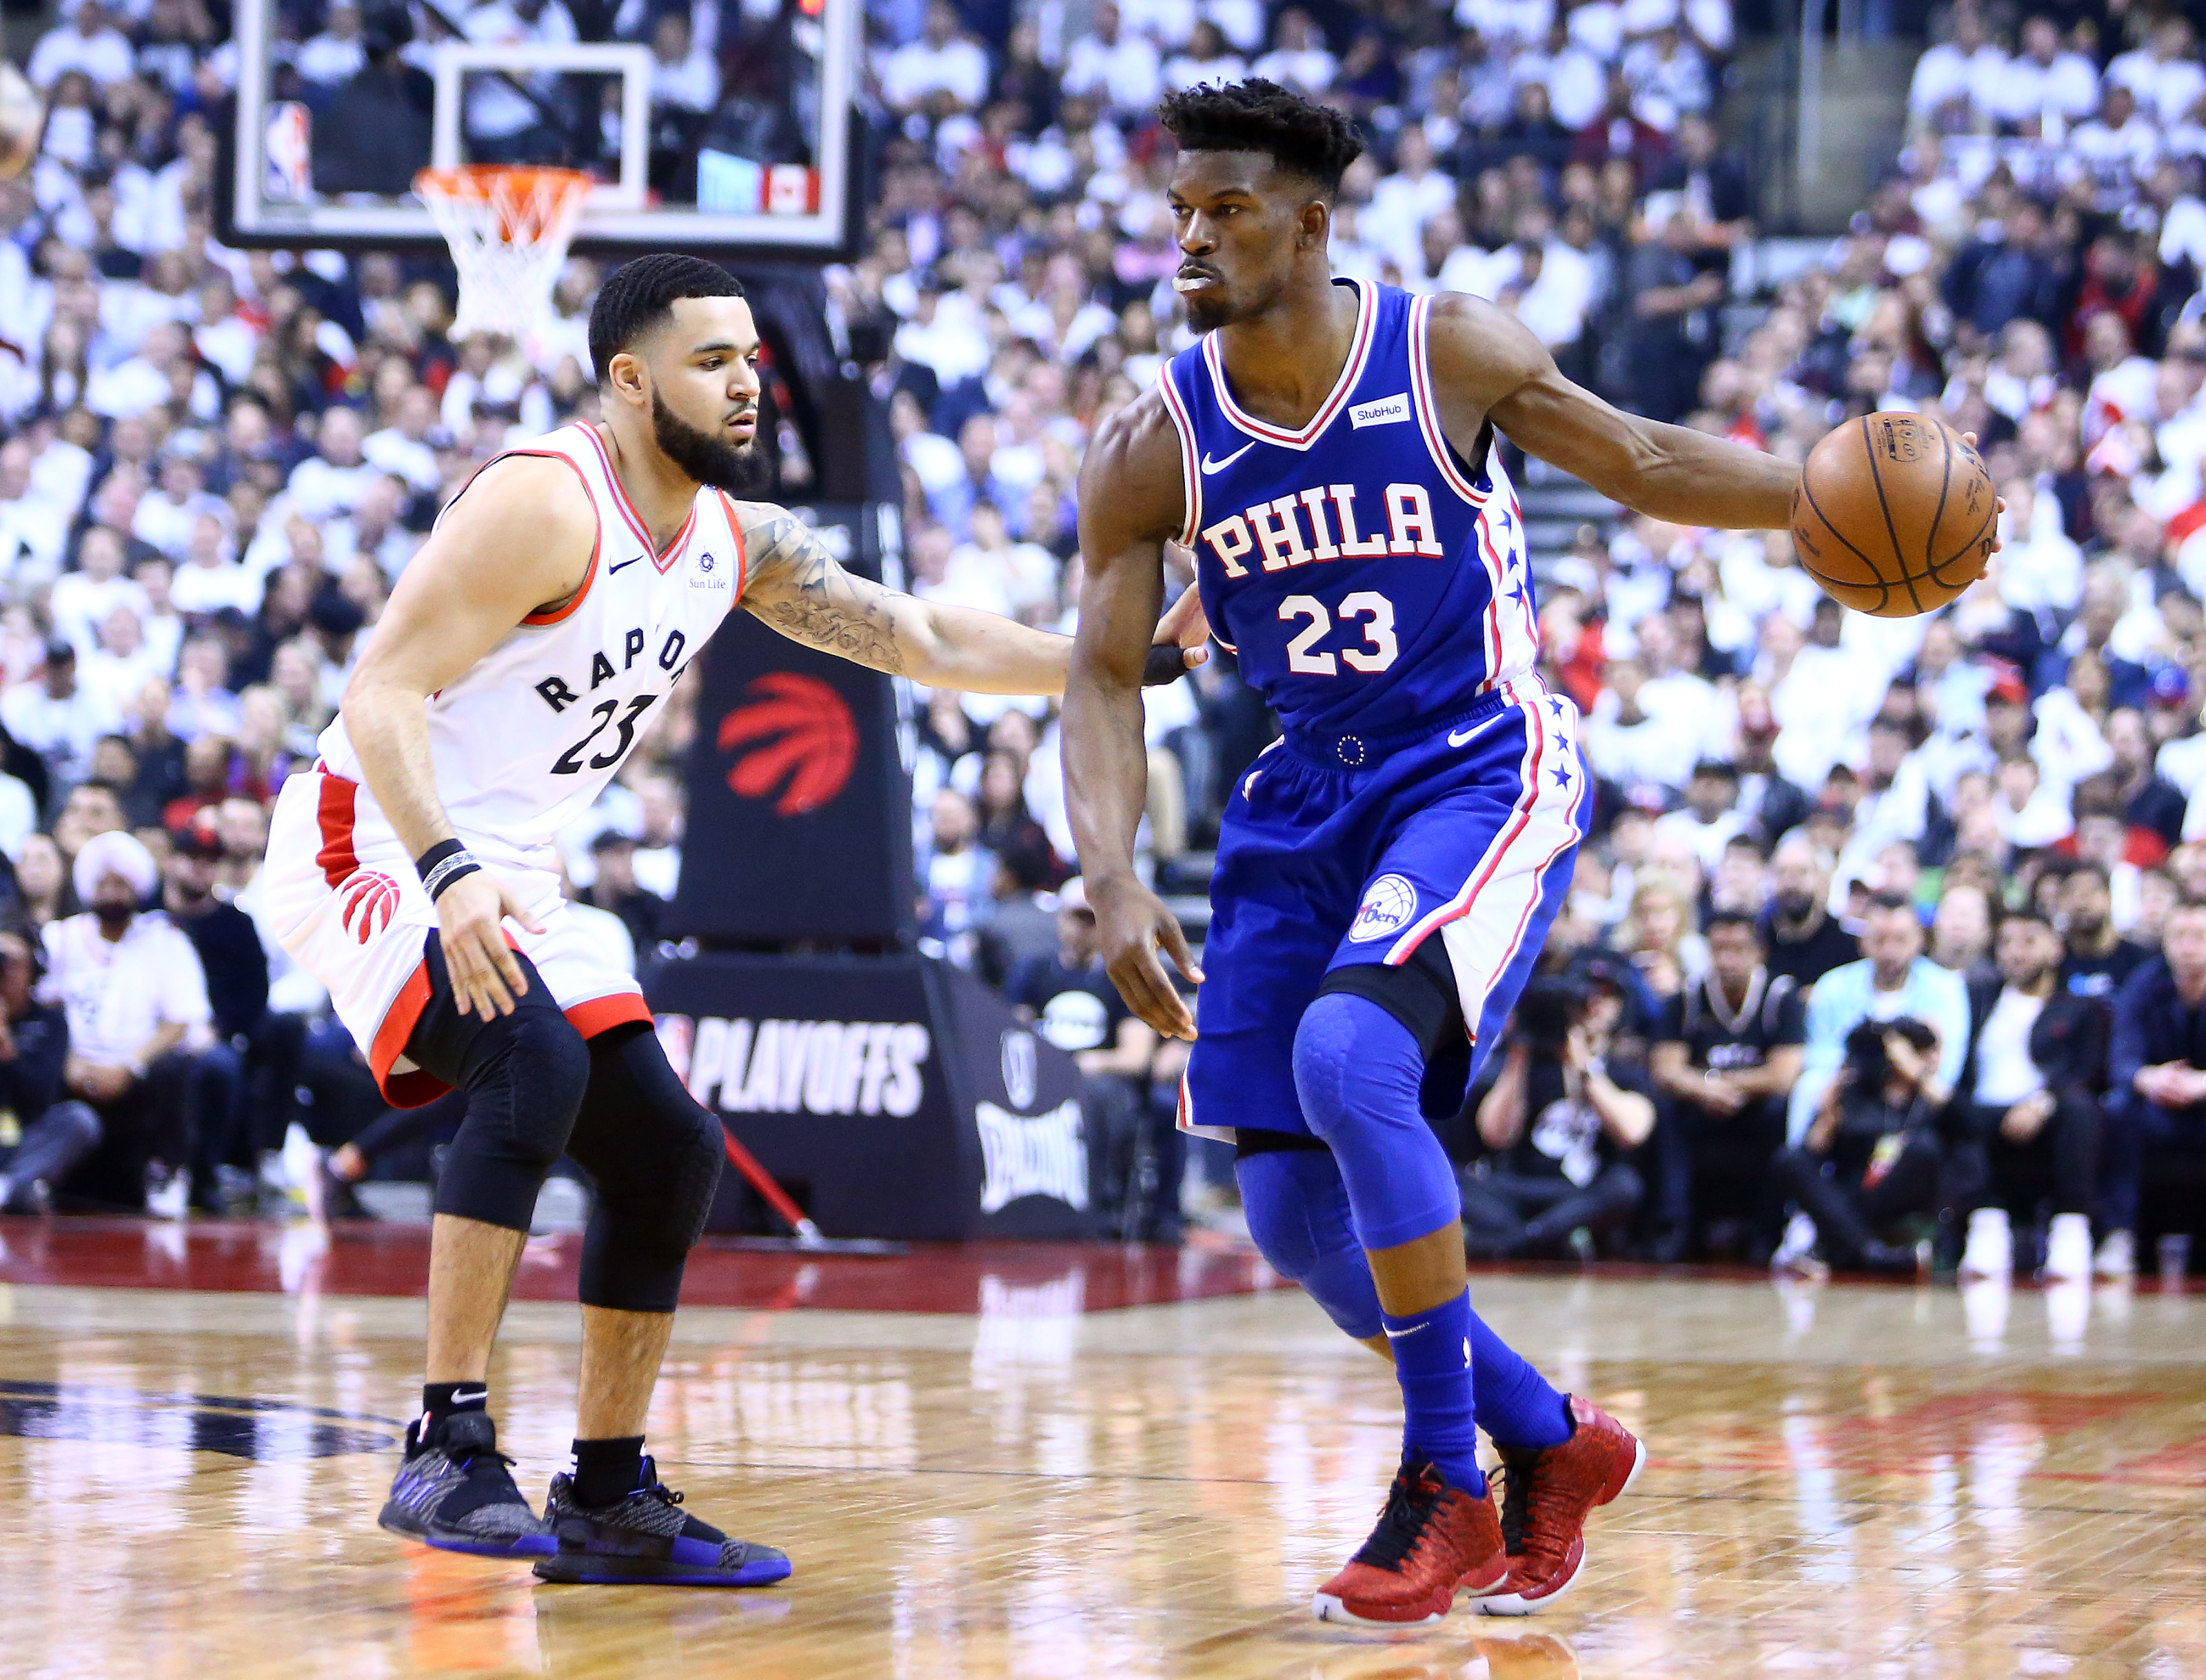 Sixers officially acquire Jimmy Butler in trade with Timberwolves